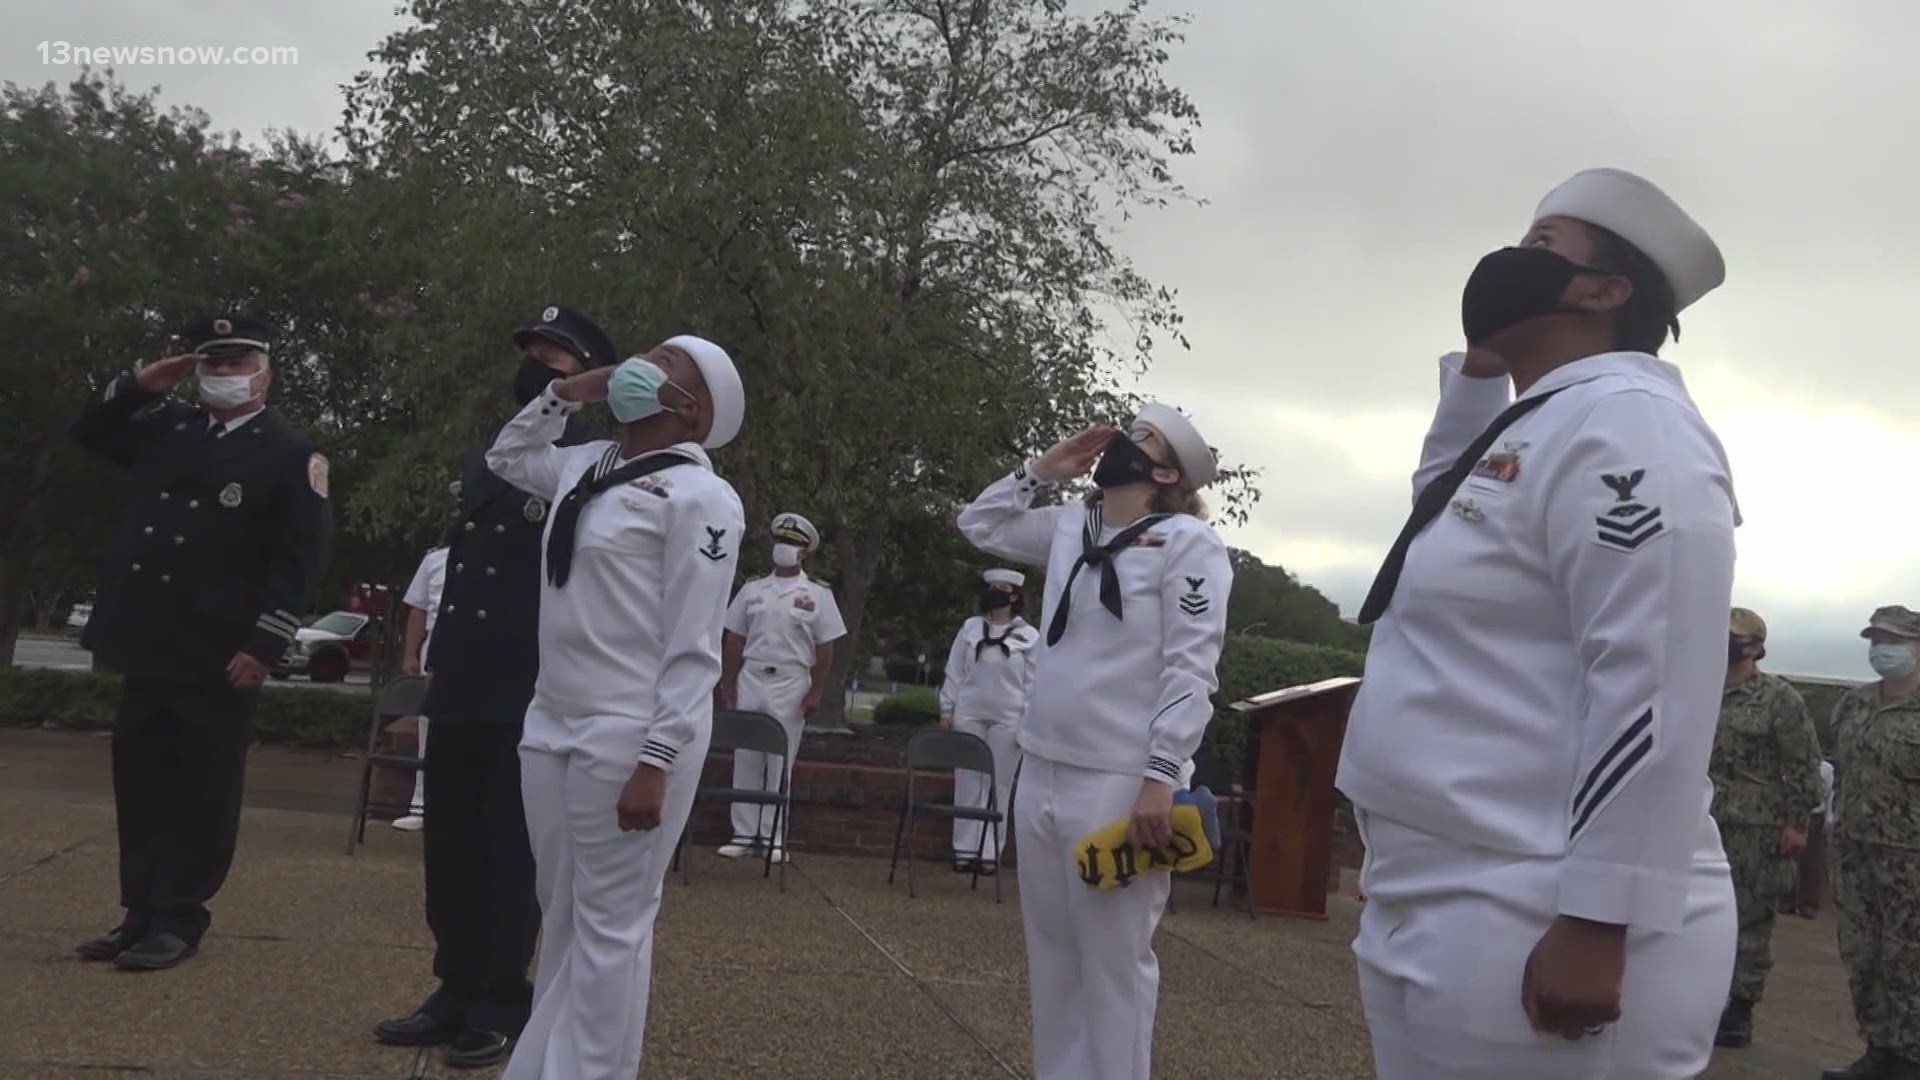 Today, the armed forces here in Hampton Roads remembered, with several solemn ceremonies.